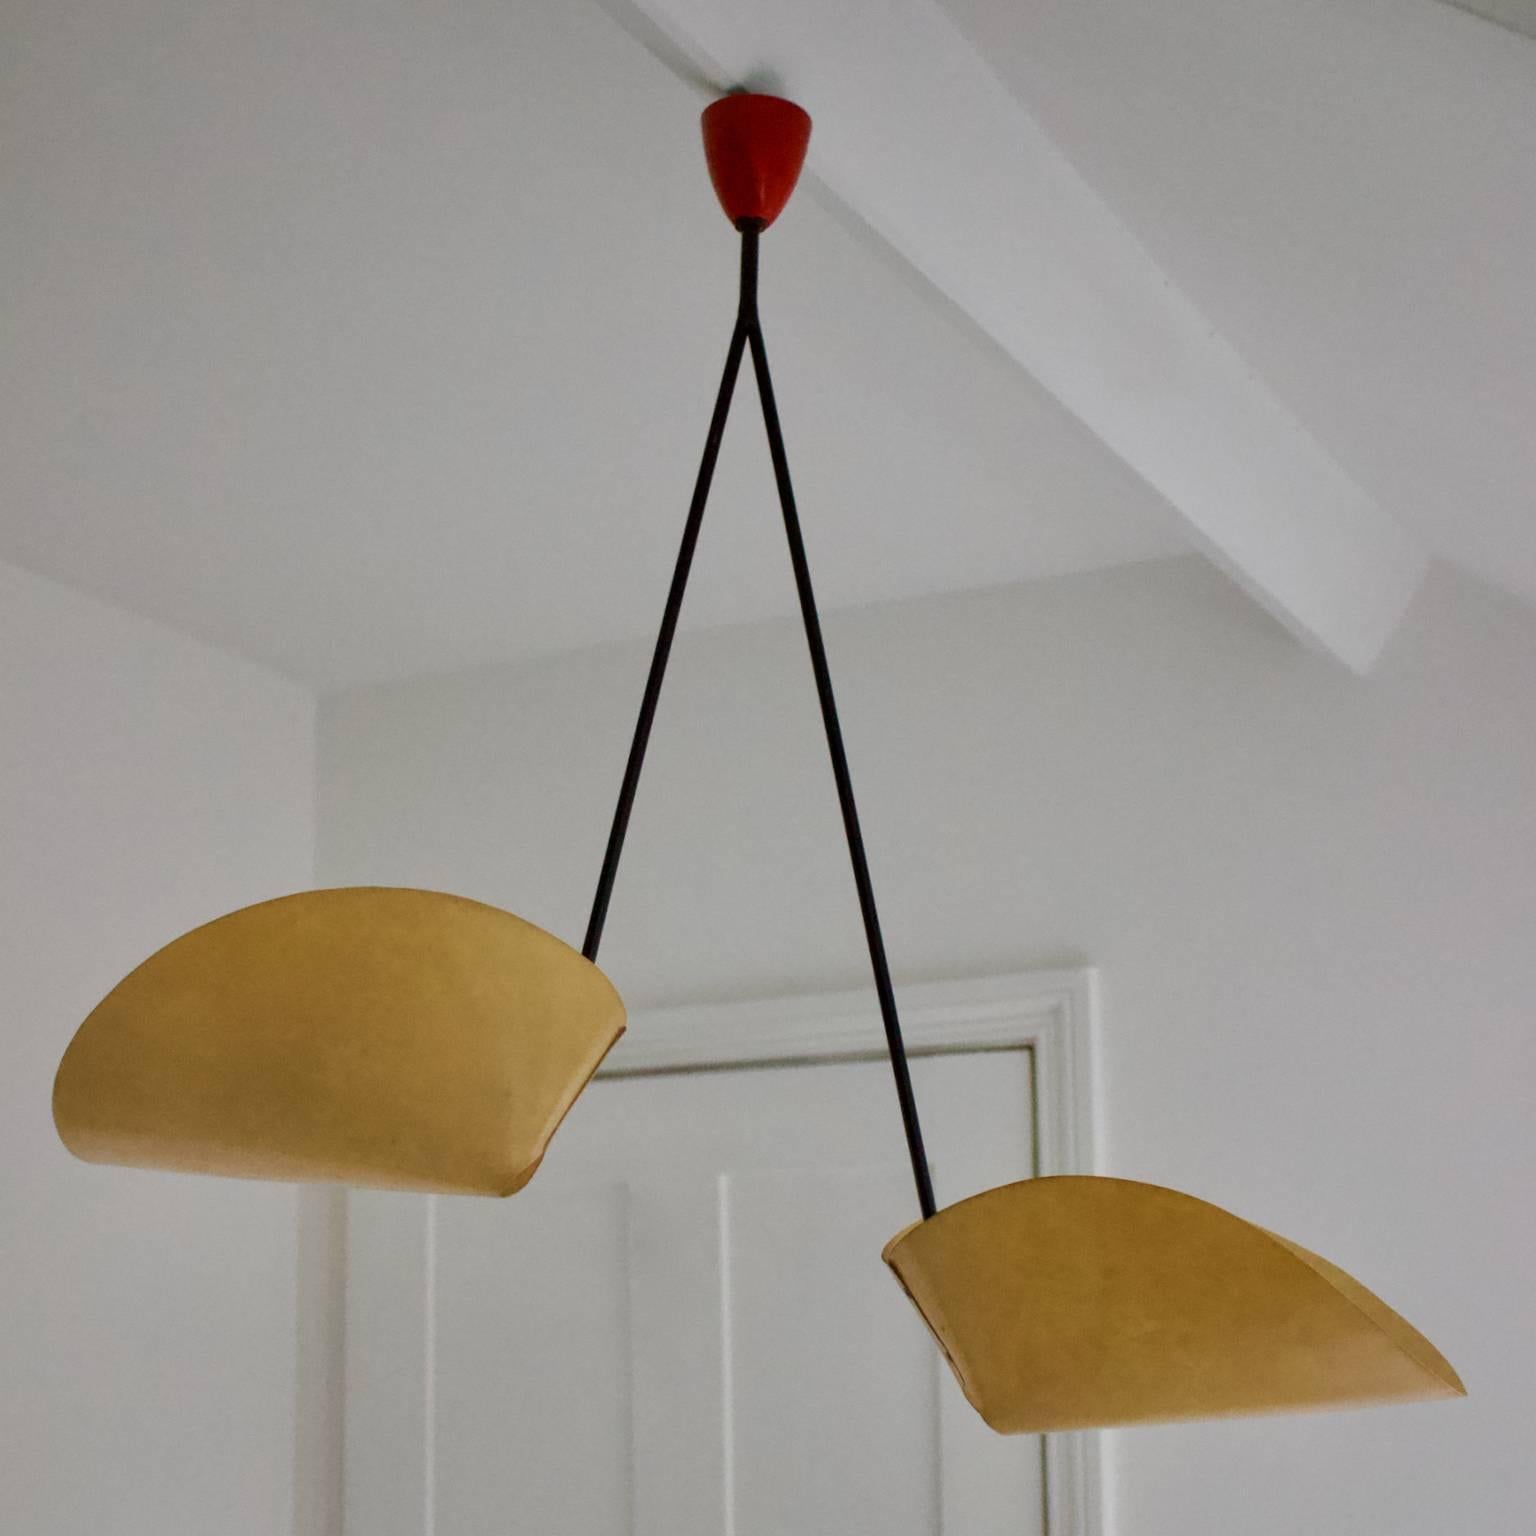 A stylish pendant light with two folded shades and a striking minimal or architectural silhouette, European, 1950s.

The light has a simple frame of tubular metal, painted black, with two light sources at different heights shielded from below by